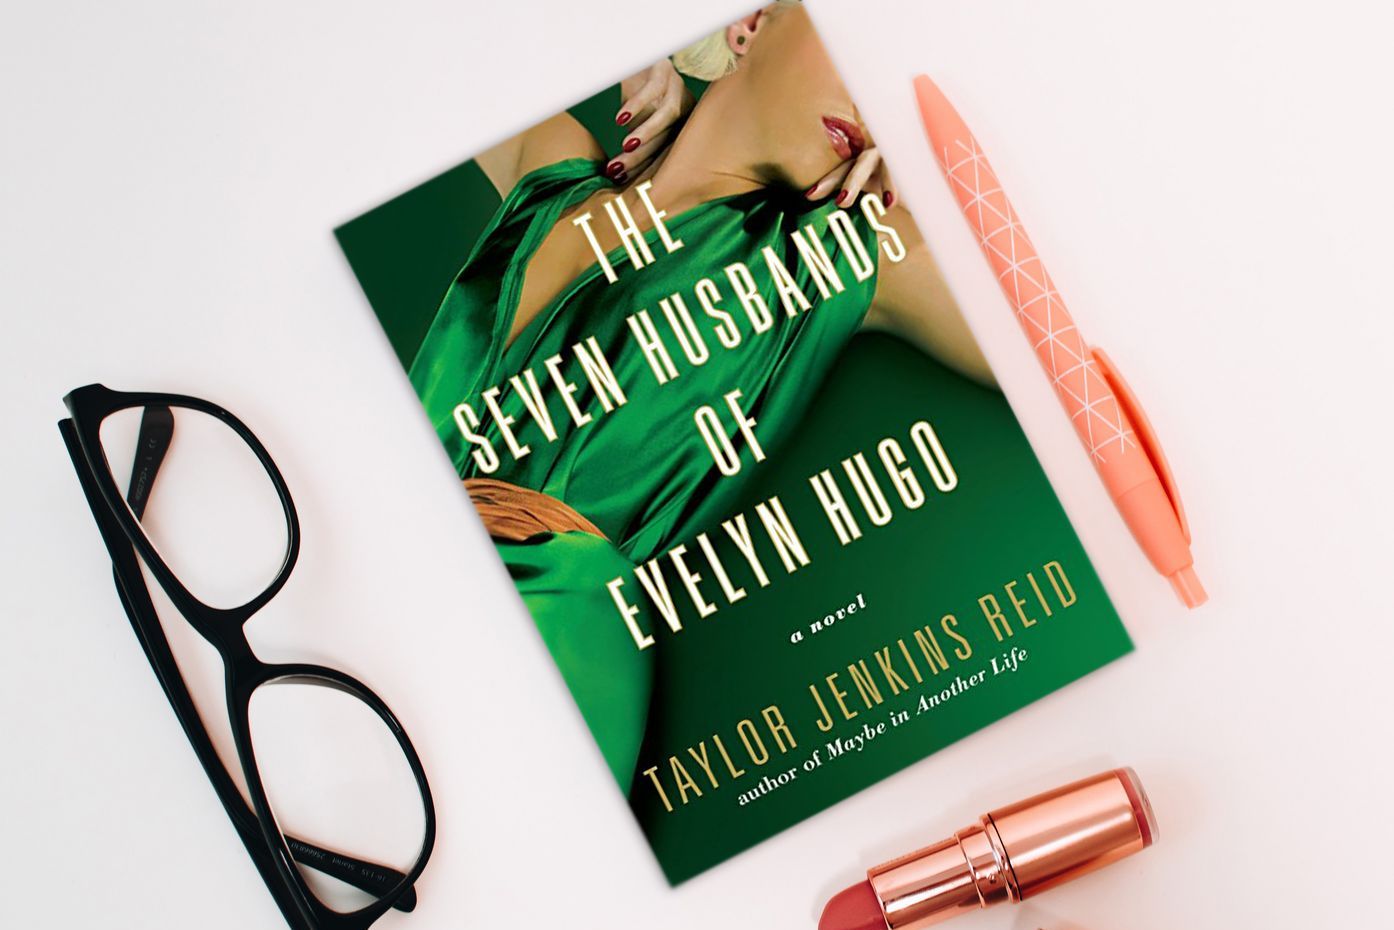 Review: The Seven Husbands of Evelyn Hugo by Taylor Jenkins Reid